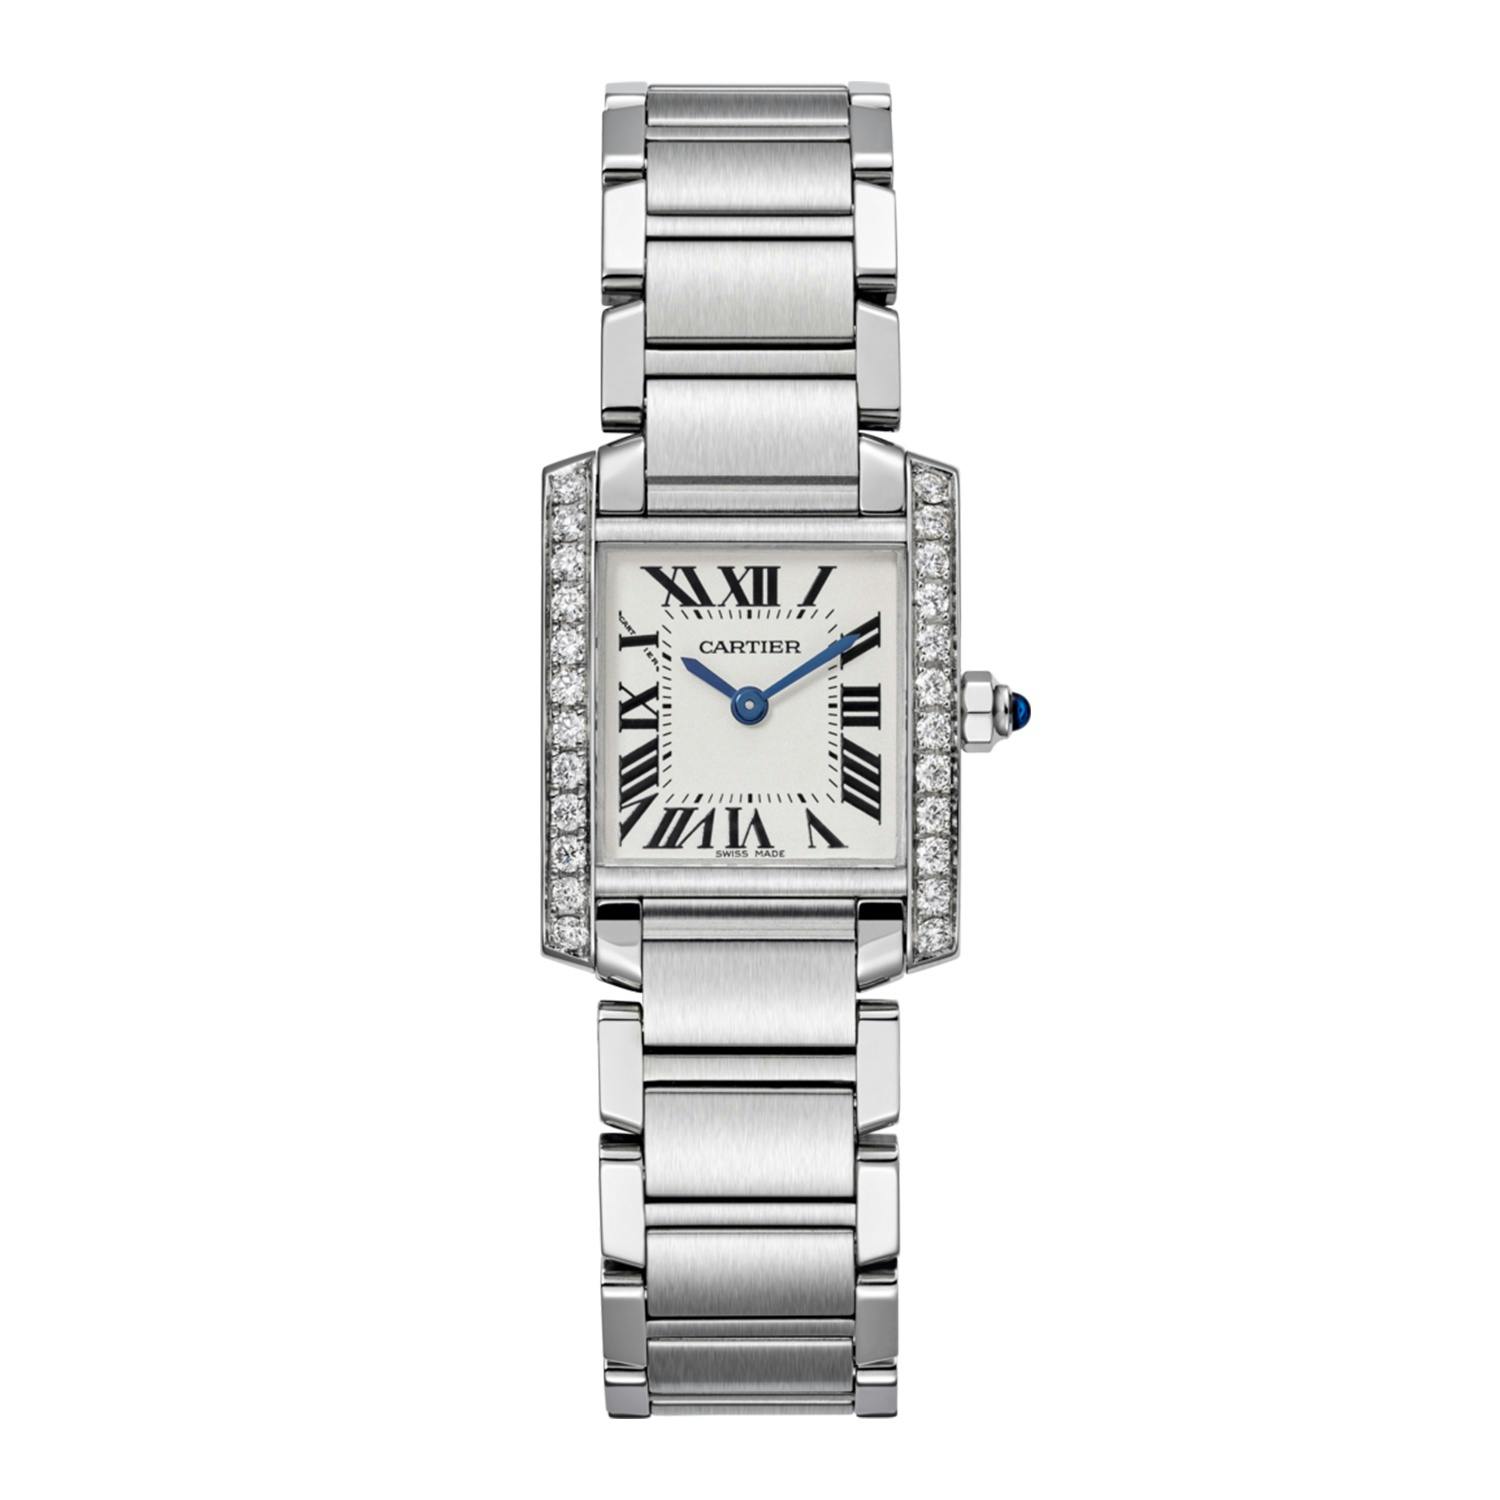 Cartier Tank Francaise Watch with Diamonds, small model 0